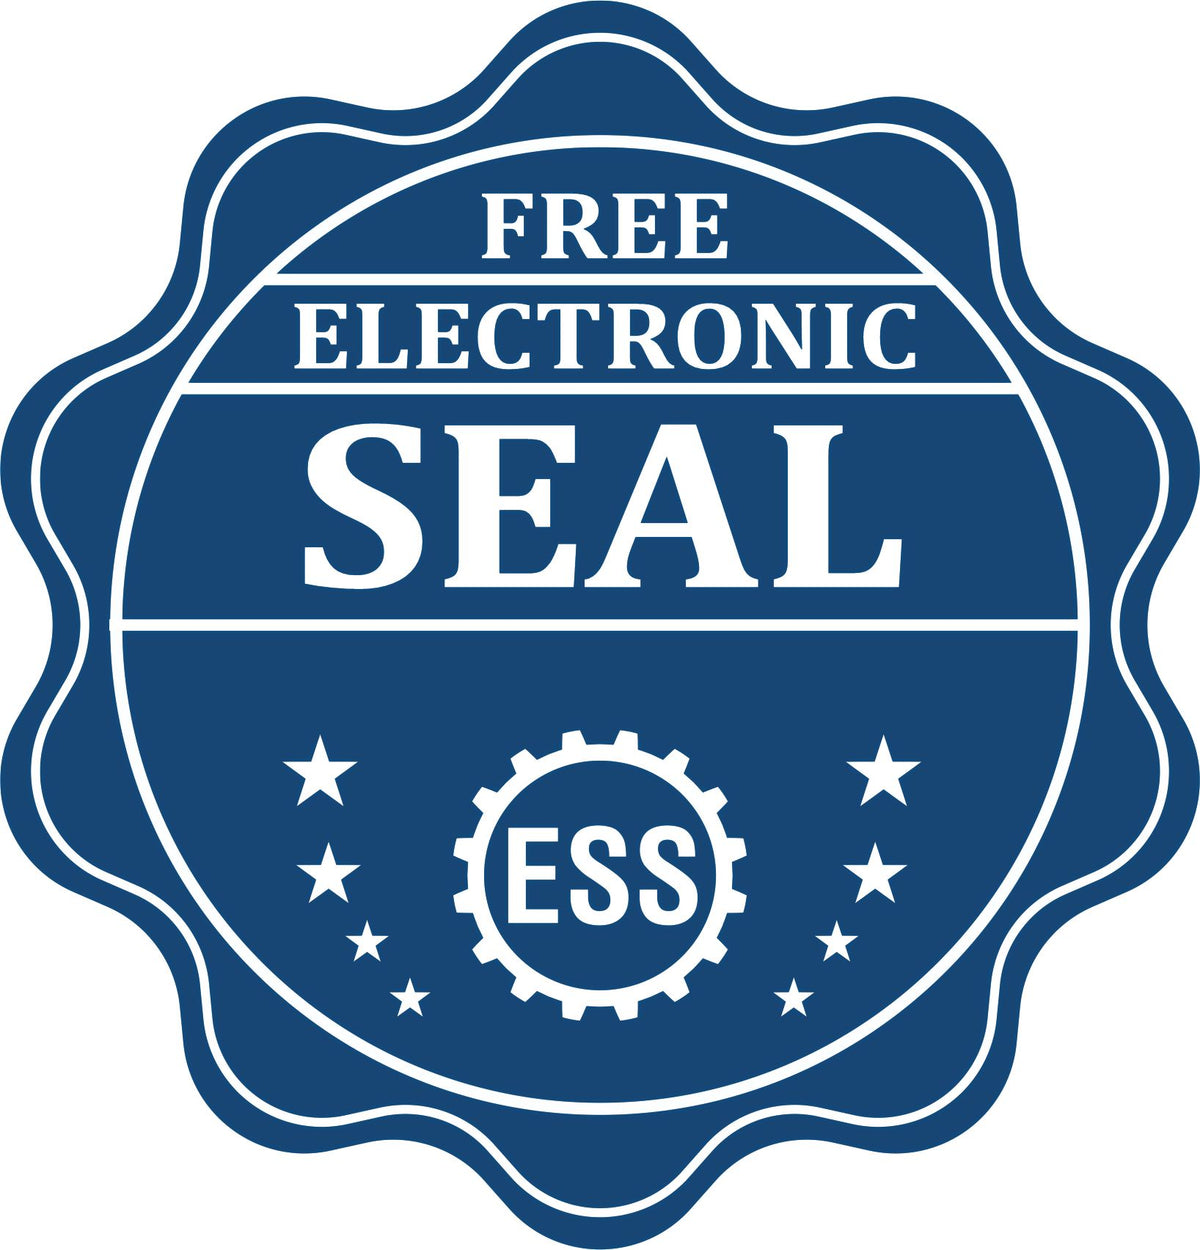 A badge showing a free electronic seal for the Heavy Duty Cast Iron Maine Land Surveyor Seal Embosser with stars and the ESS gear on the emblem.